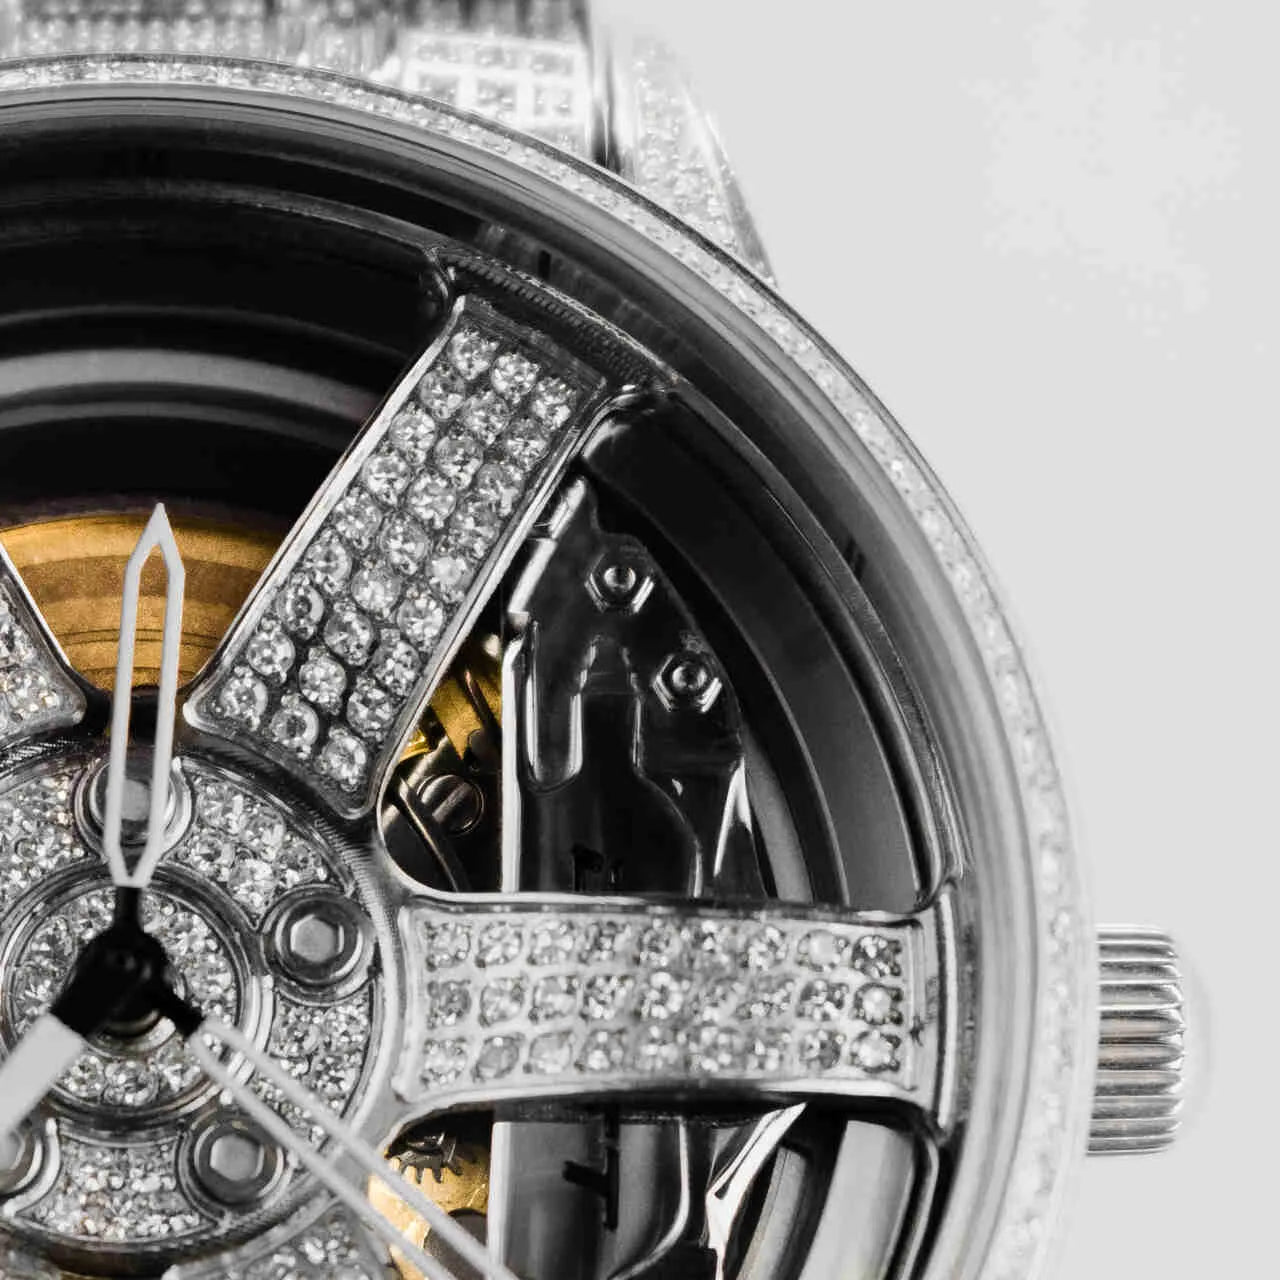 3RD ANNIVERSARY FELGENUHR ICED OUT VVS-EDITION